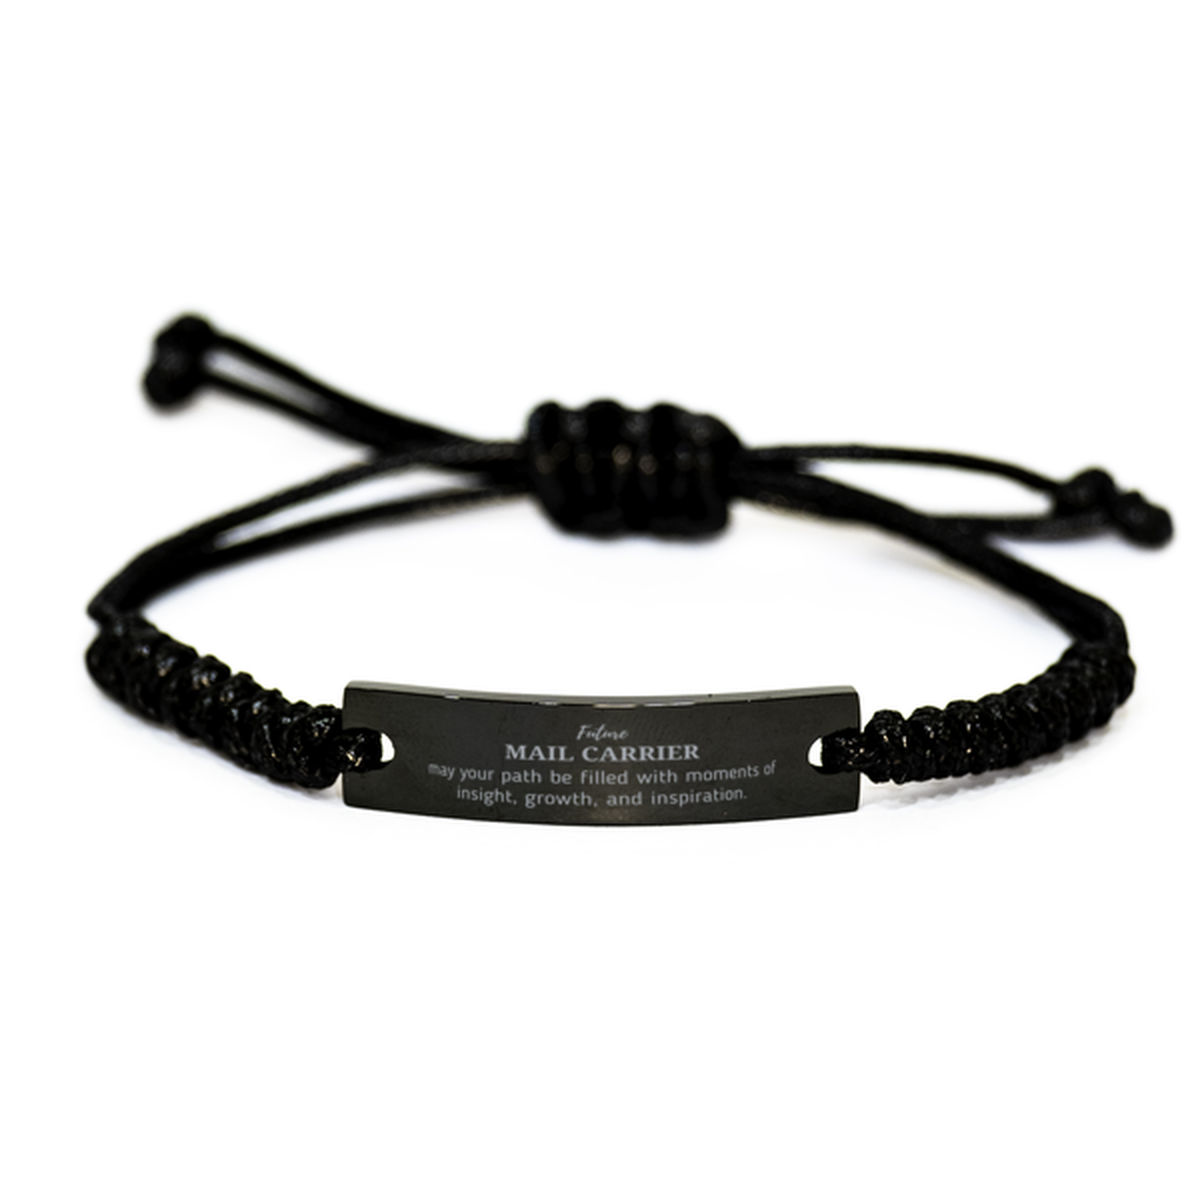 Future Mail Carrier Gifts, May your path be filled with moments of insight, Graduation Gifts for New Mail Carrier, Christmas Unique Black Rope Bracelet For Men, Women, Friends